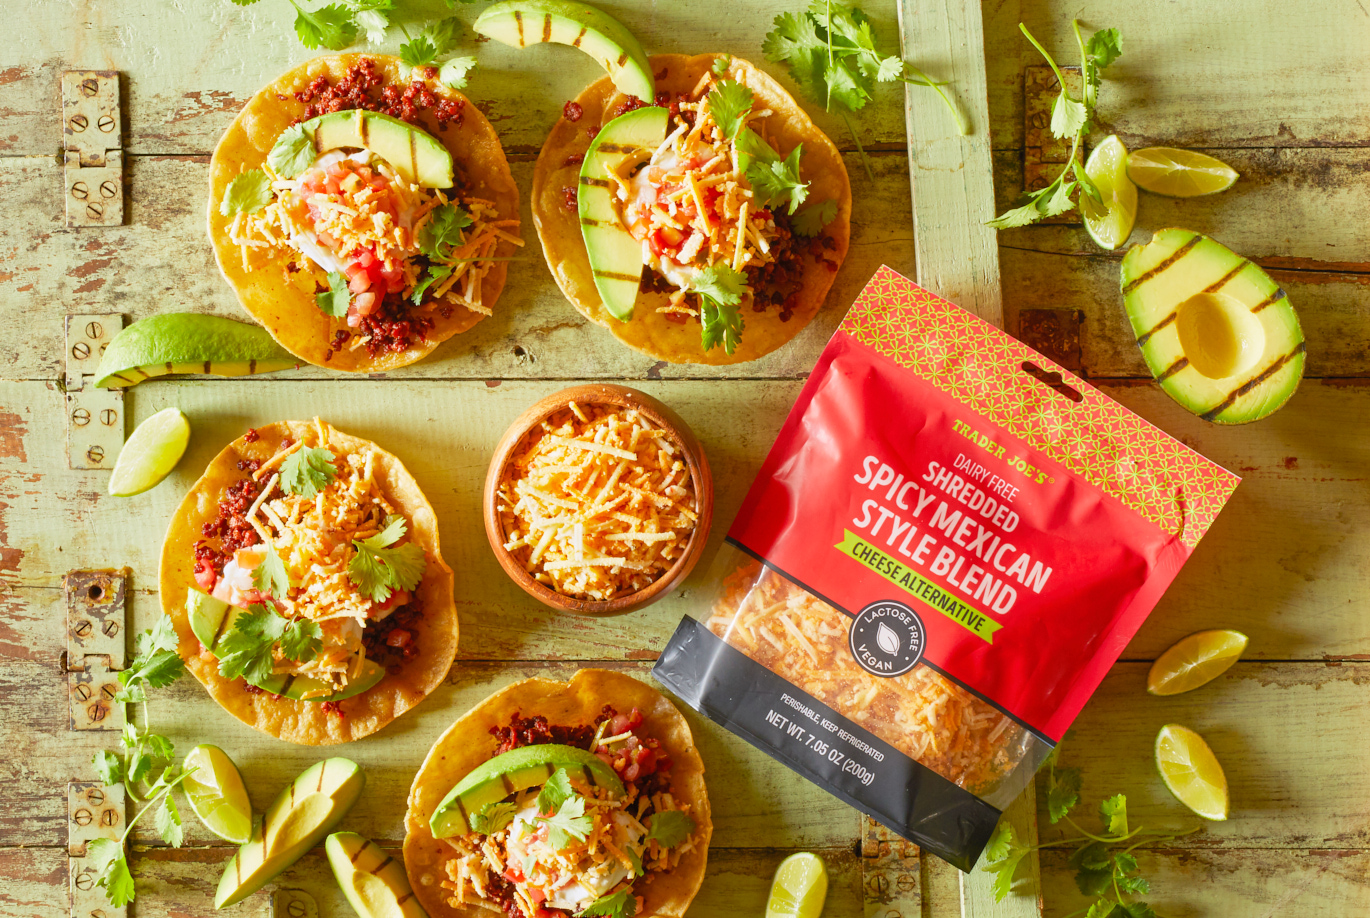 Dairy Free Shredded Spicy Mexican Style Blend Cheese Alternative